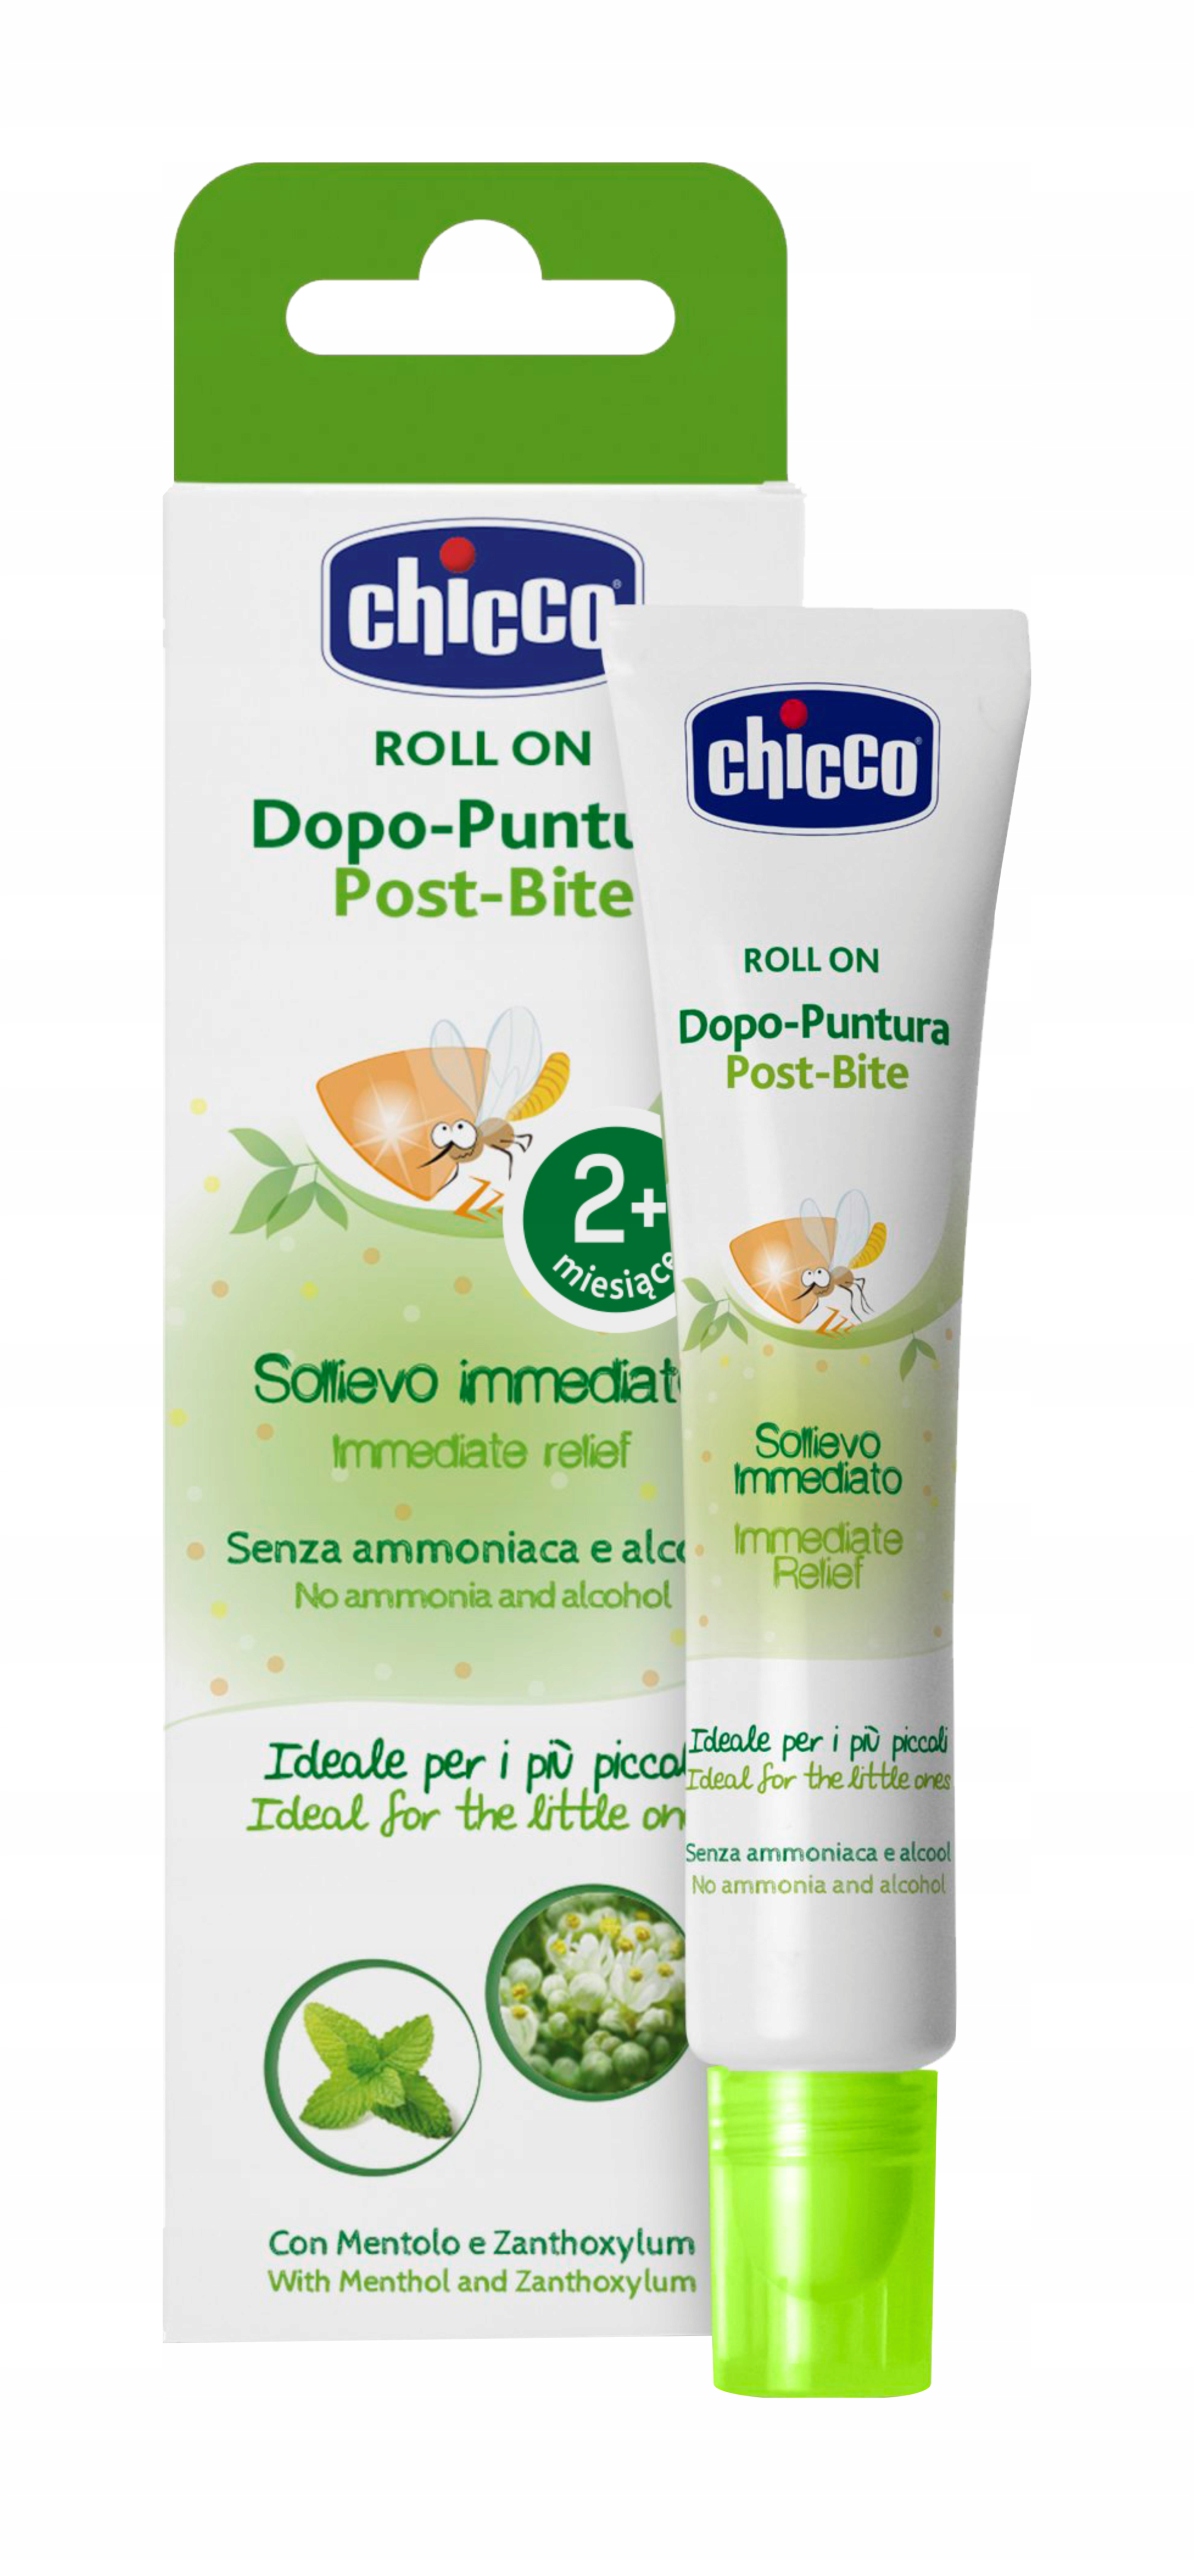 CHICCO ROLL-ON SOOTHING 2M + комариный укус